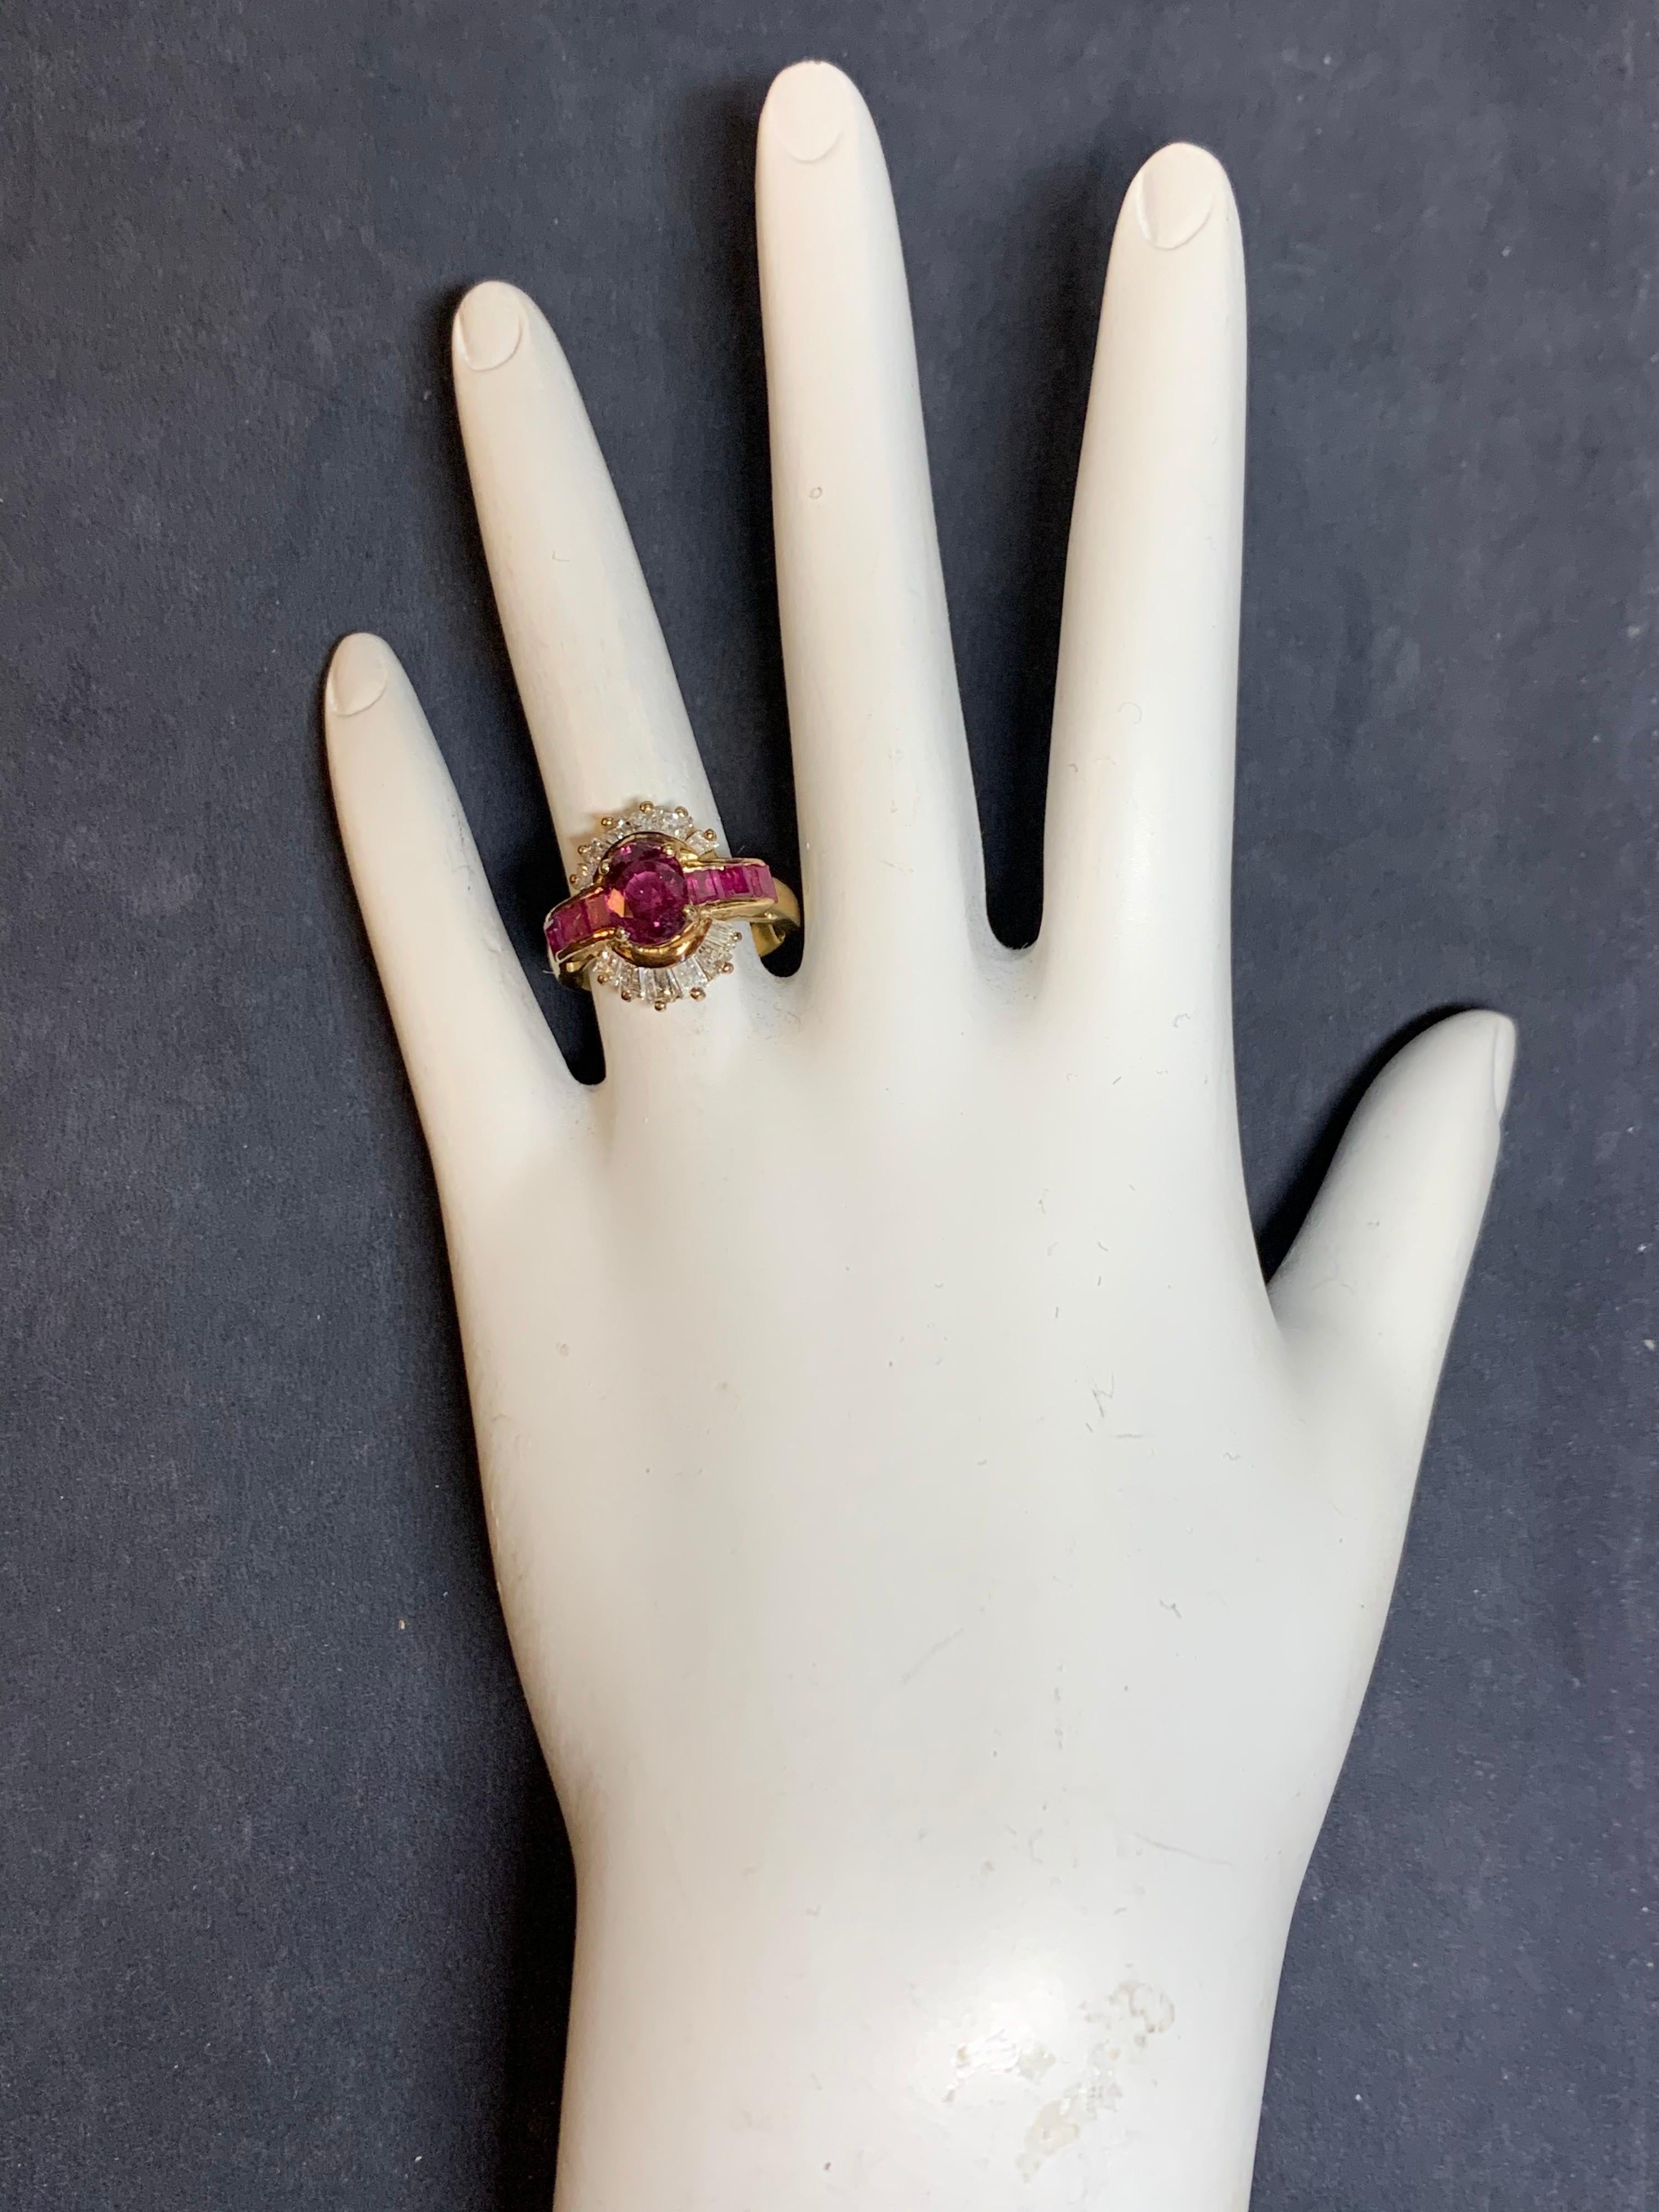 Retro 14k Yellow Gold Cocktail Ring, approximately 3.25 Carats of Natural Rubies & Diamonds.

The center oval weighs 1.67 carats and measures 7.8x6x4 and flanked with 6 square emerald cut rubies weighing approximately 0.83 carats. The 12 tapered